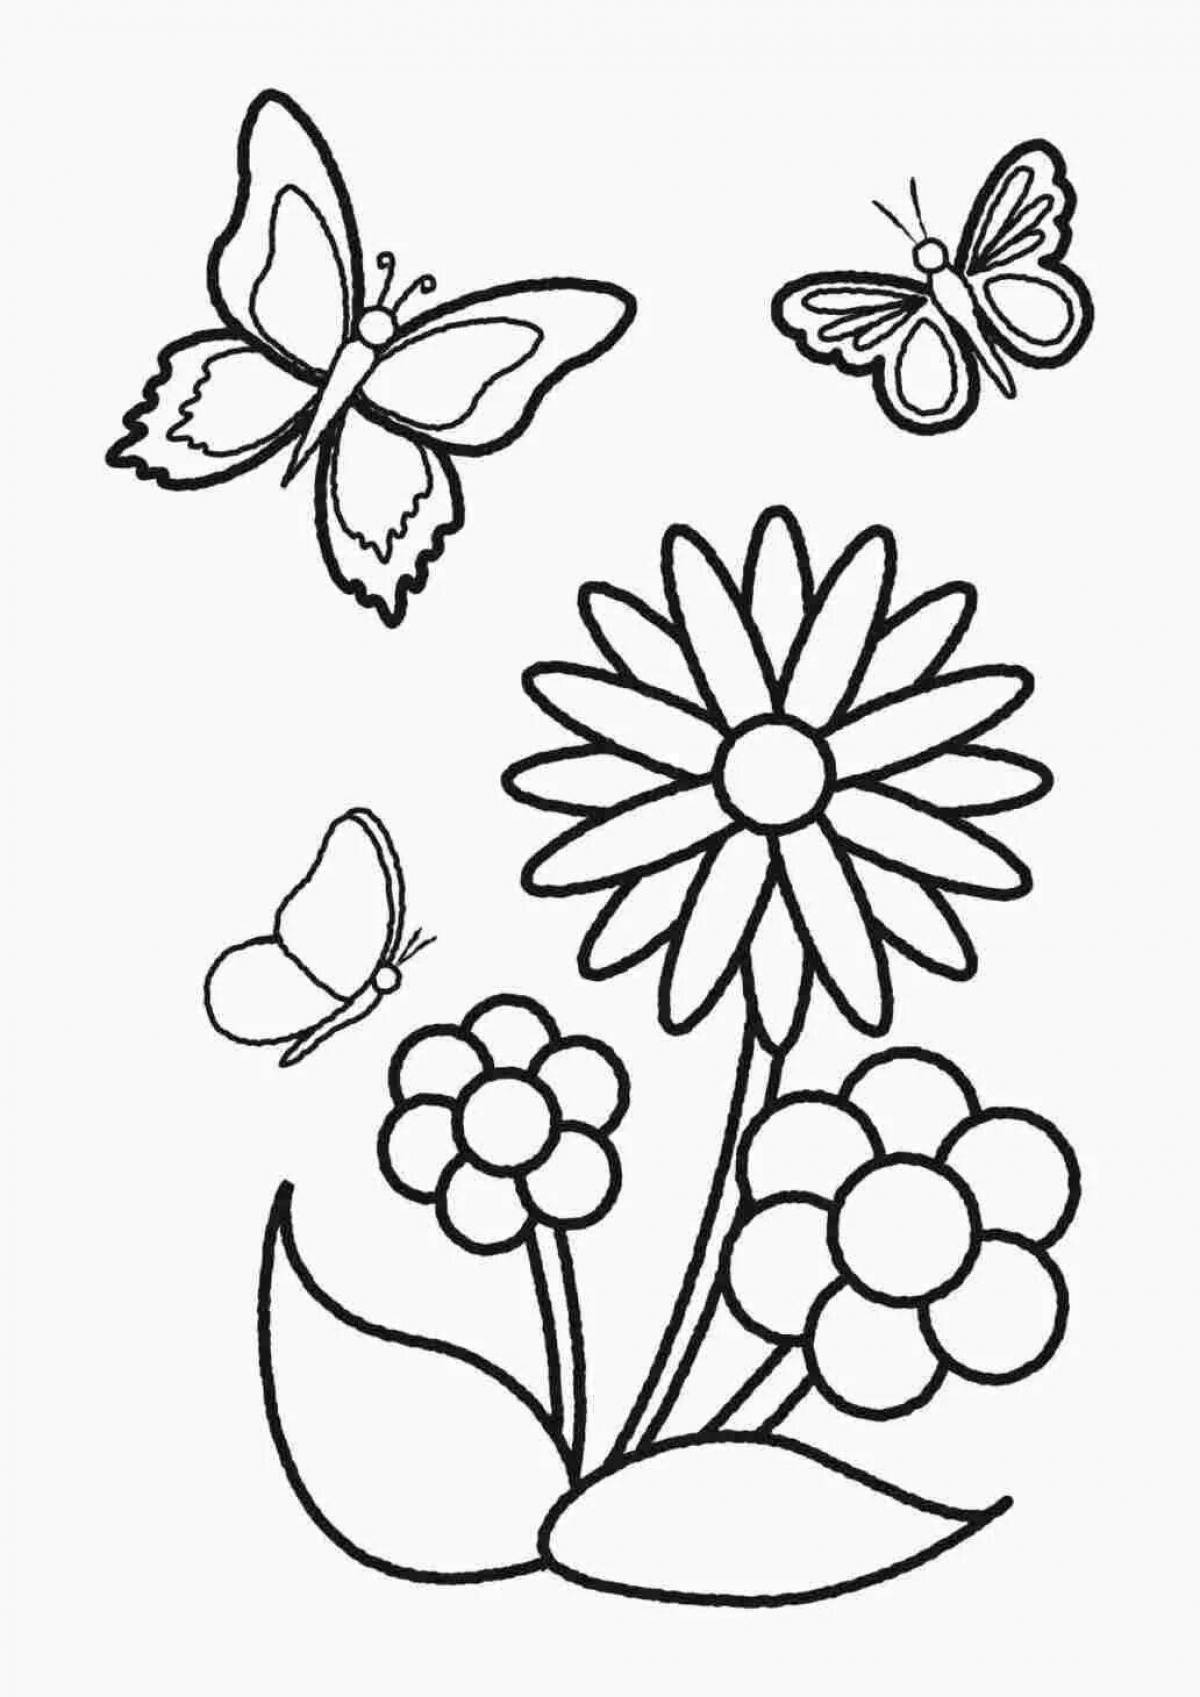 Fun coloring flower for children 5 years old